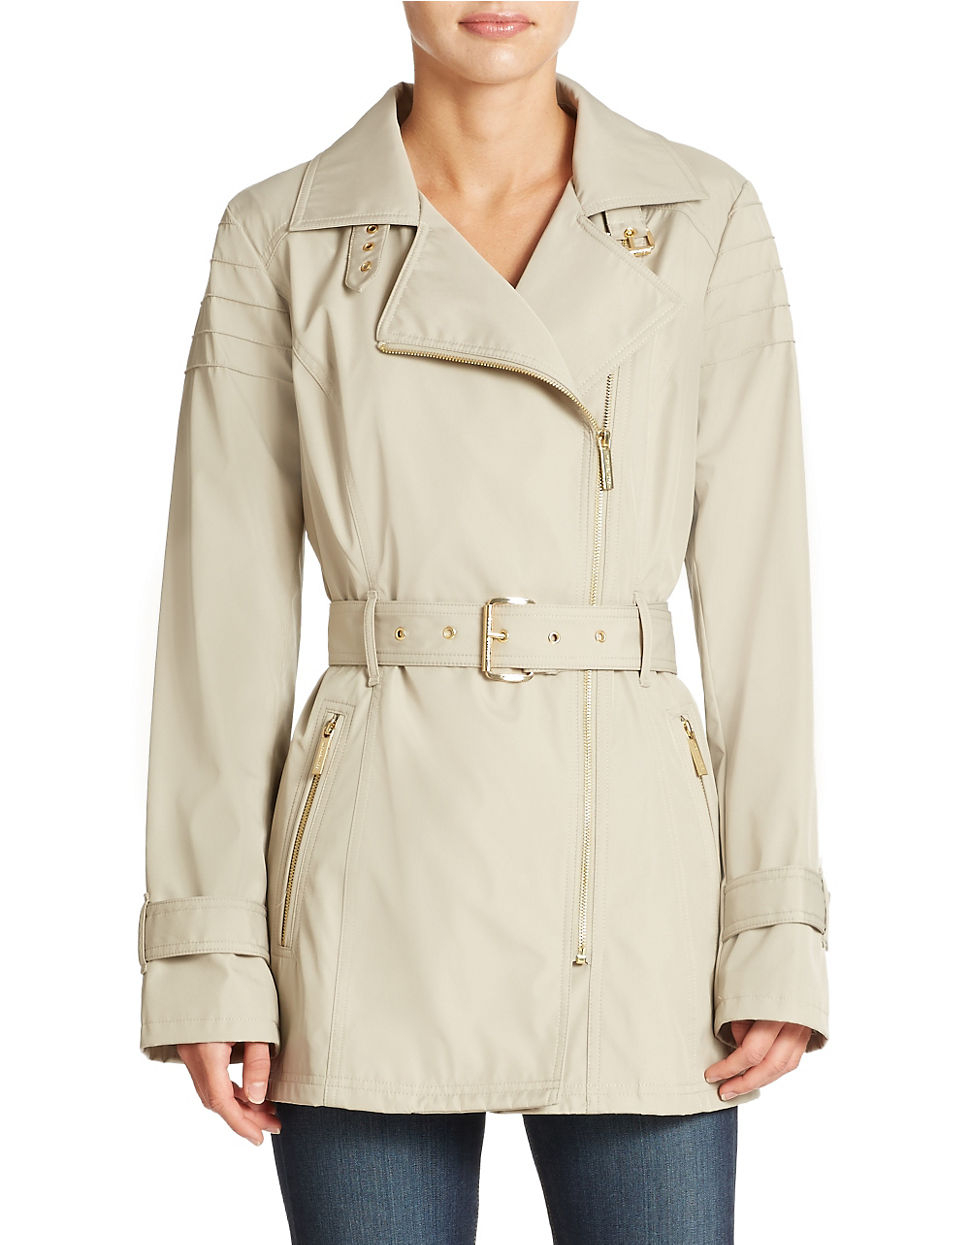 West cheap quick asymmetrical trench